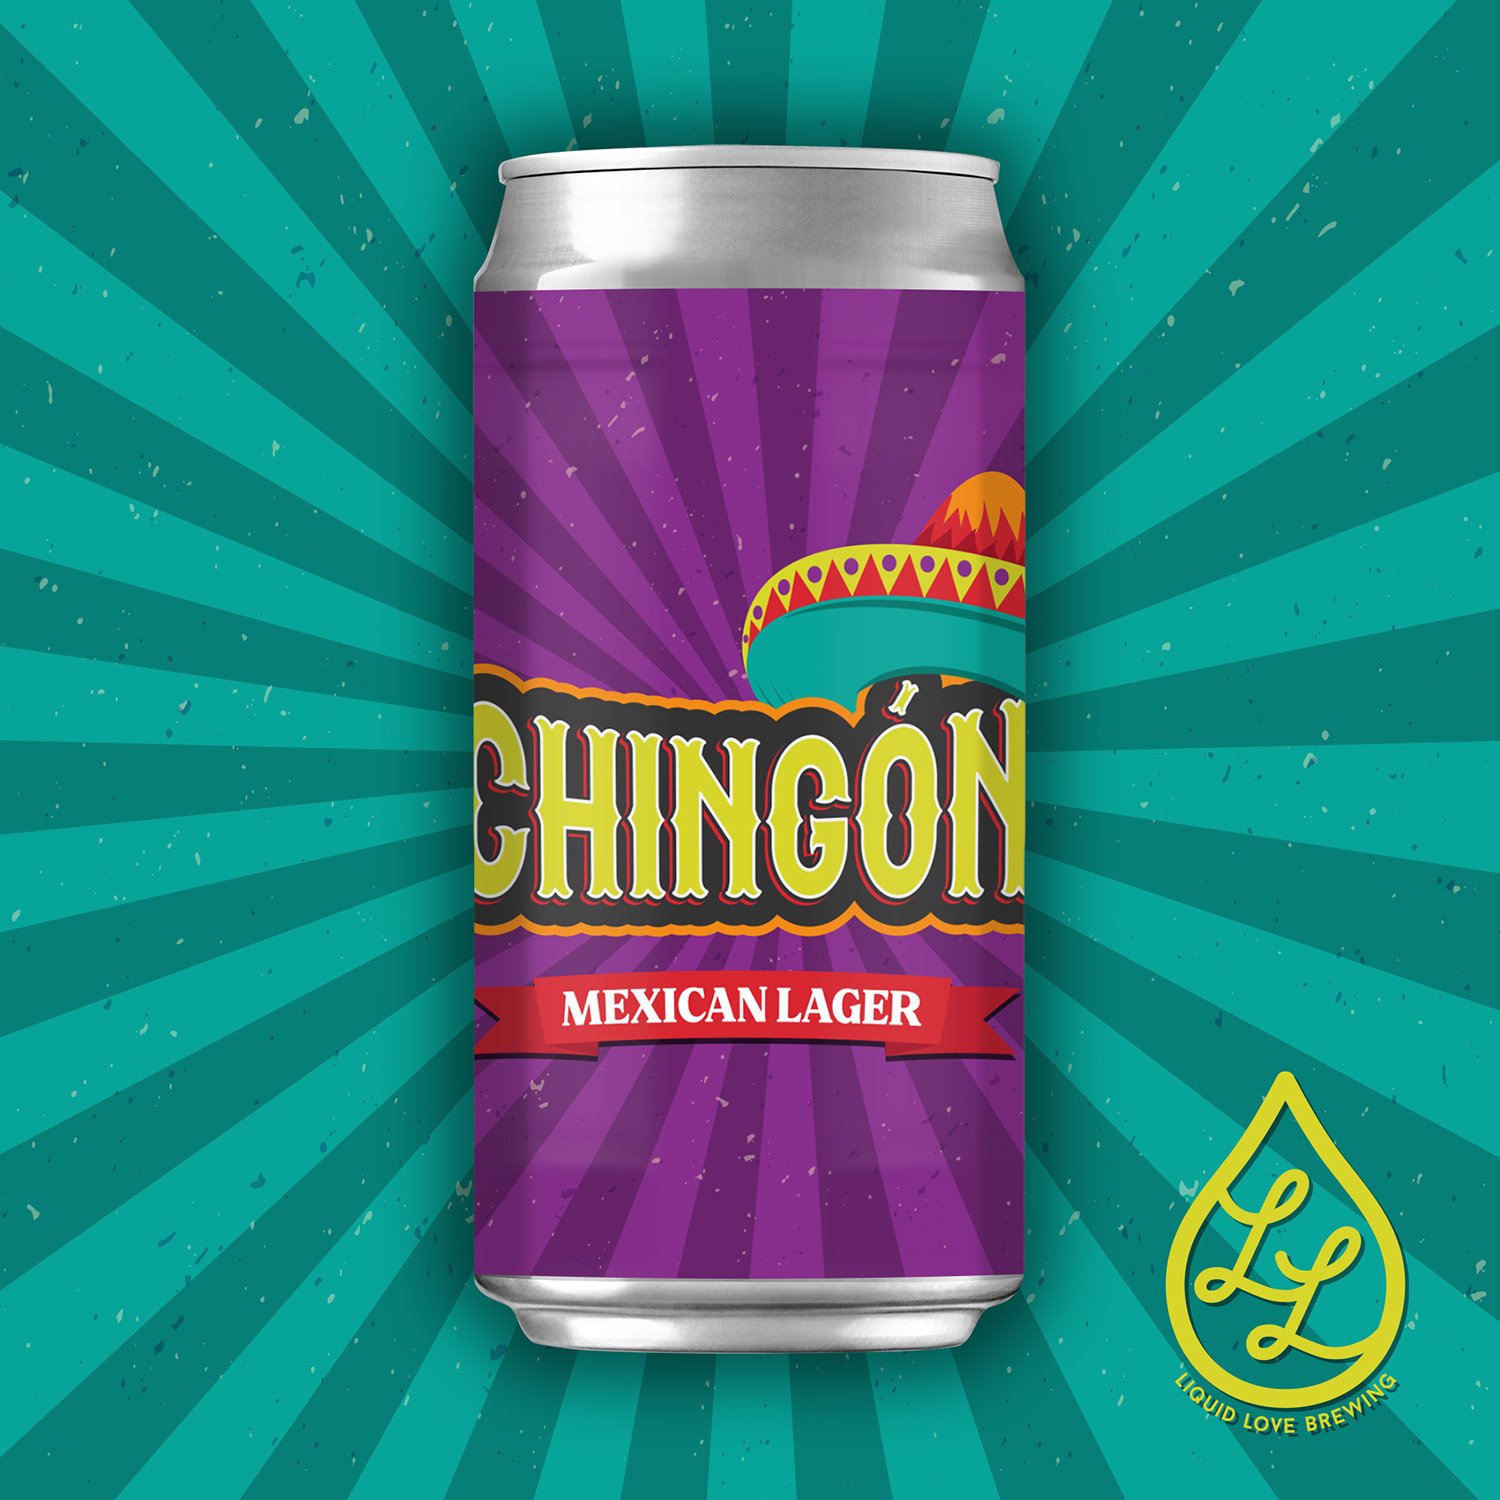 Chingon - Mexican Lager